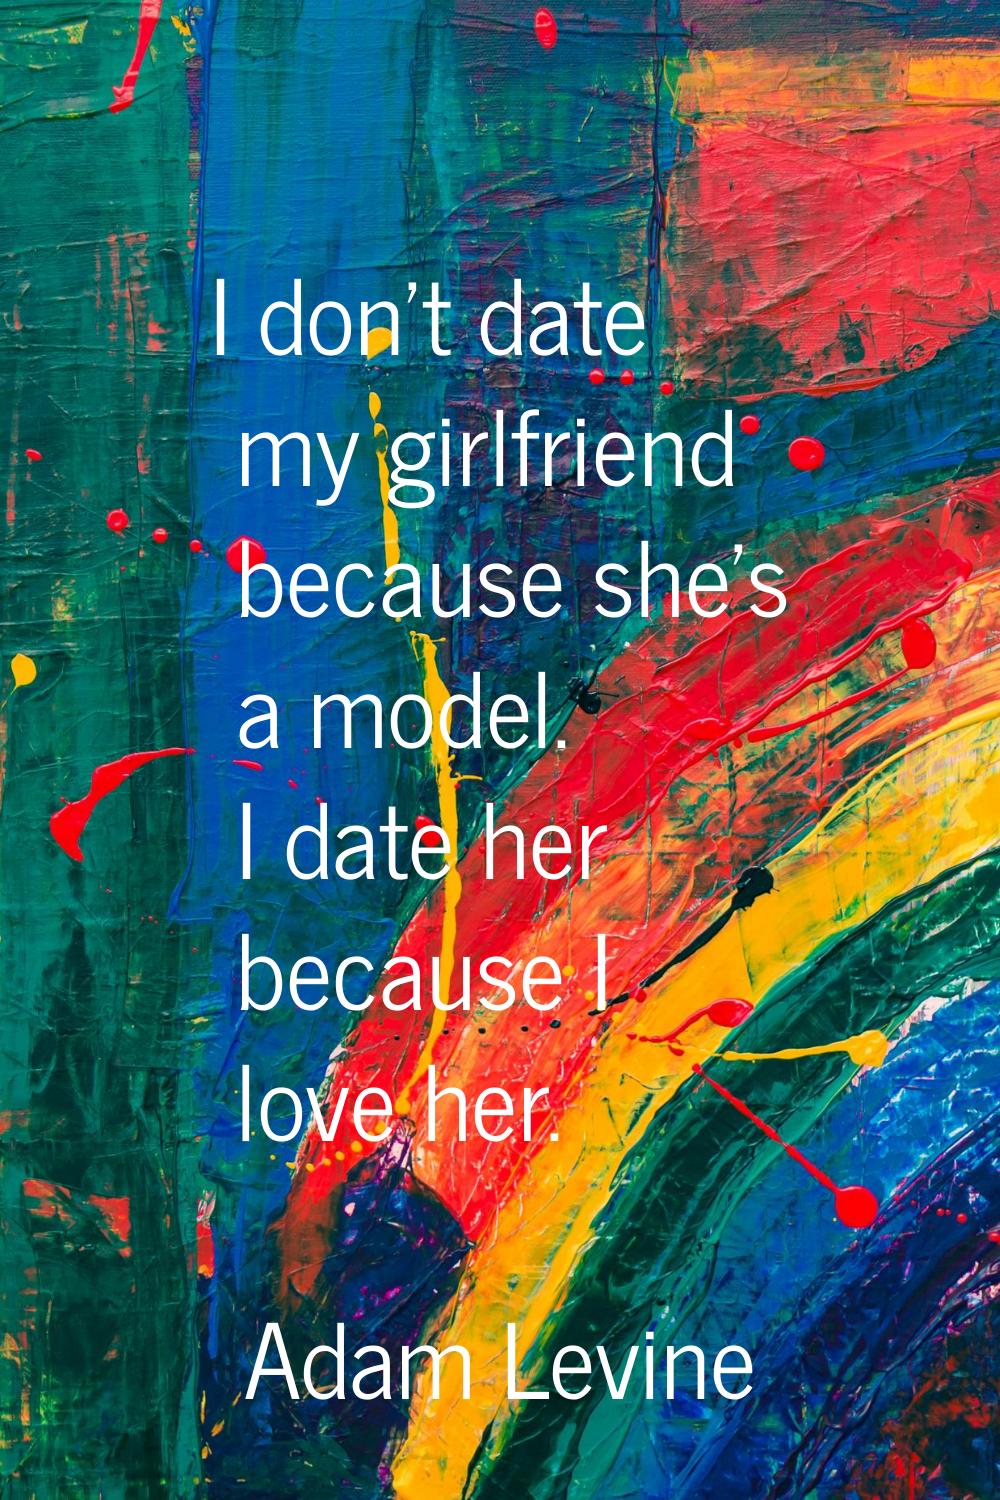 I don't date my girlfriend because she's a model. I date her because I love her.